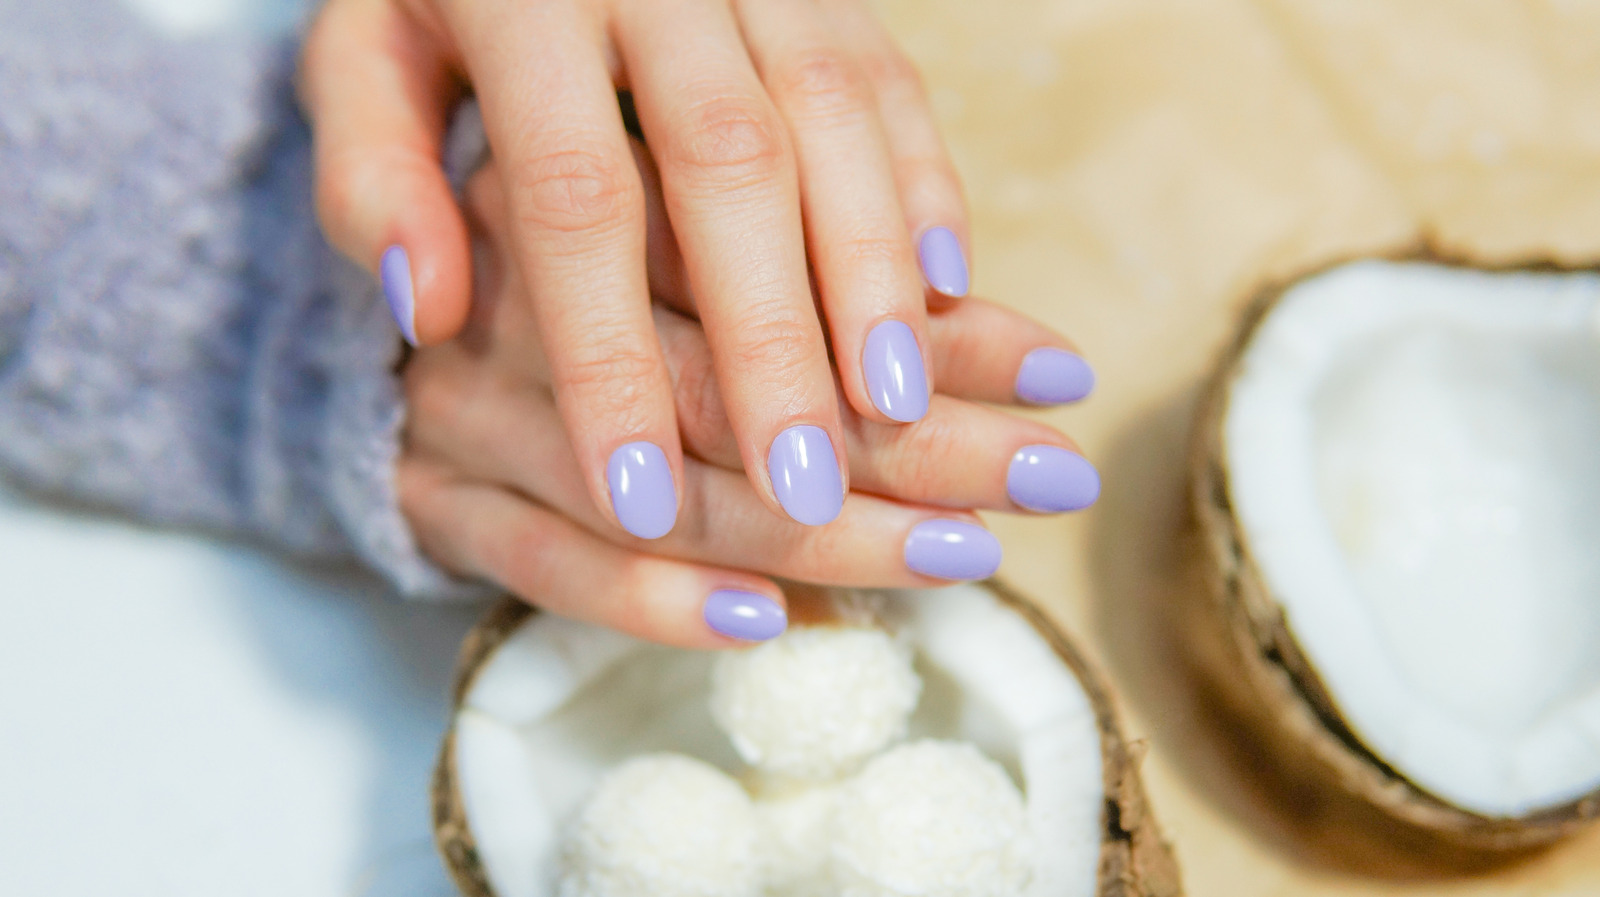 How to Buff Your Nails (Coconut Oil) - YouTube